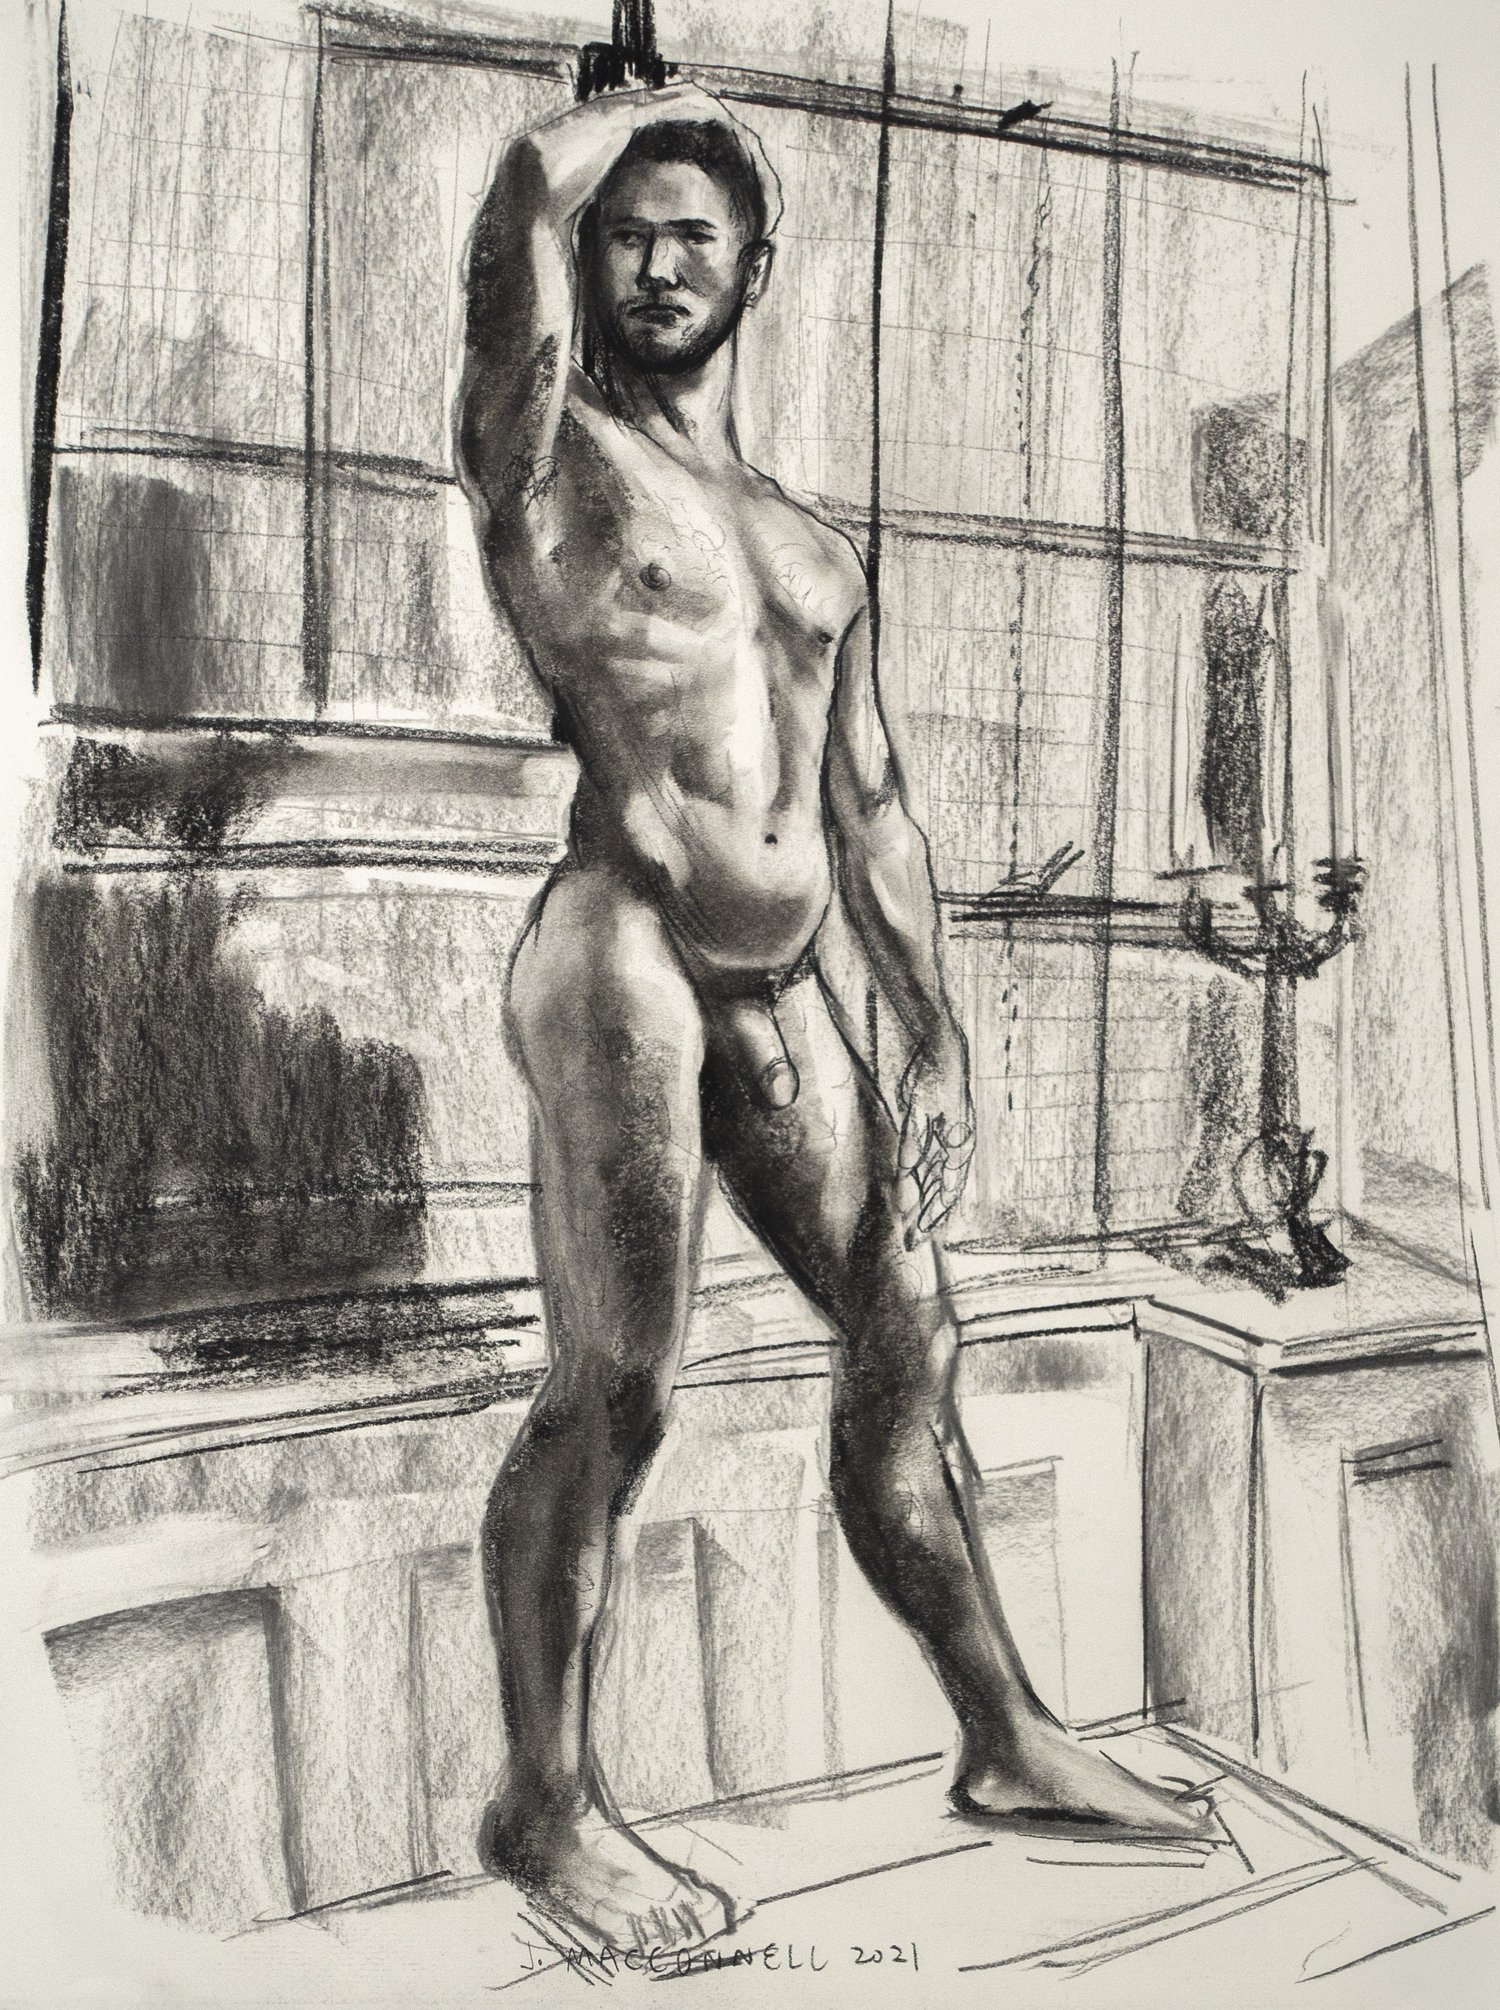   John MacConnell,  Joshua , 2021, charcoal on paper, 24”x18”   Inquire  